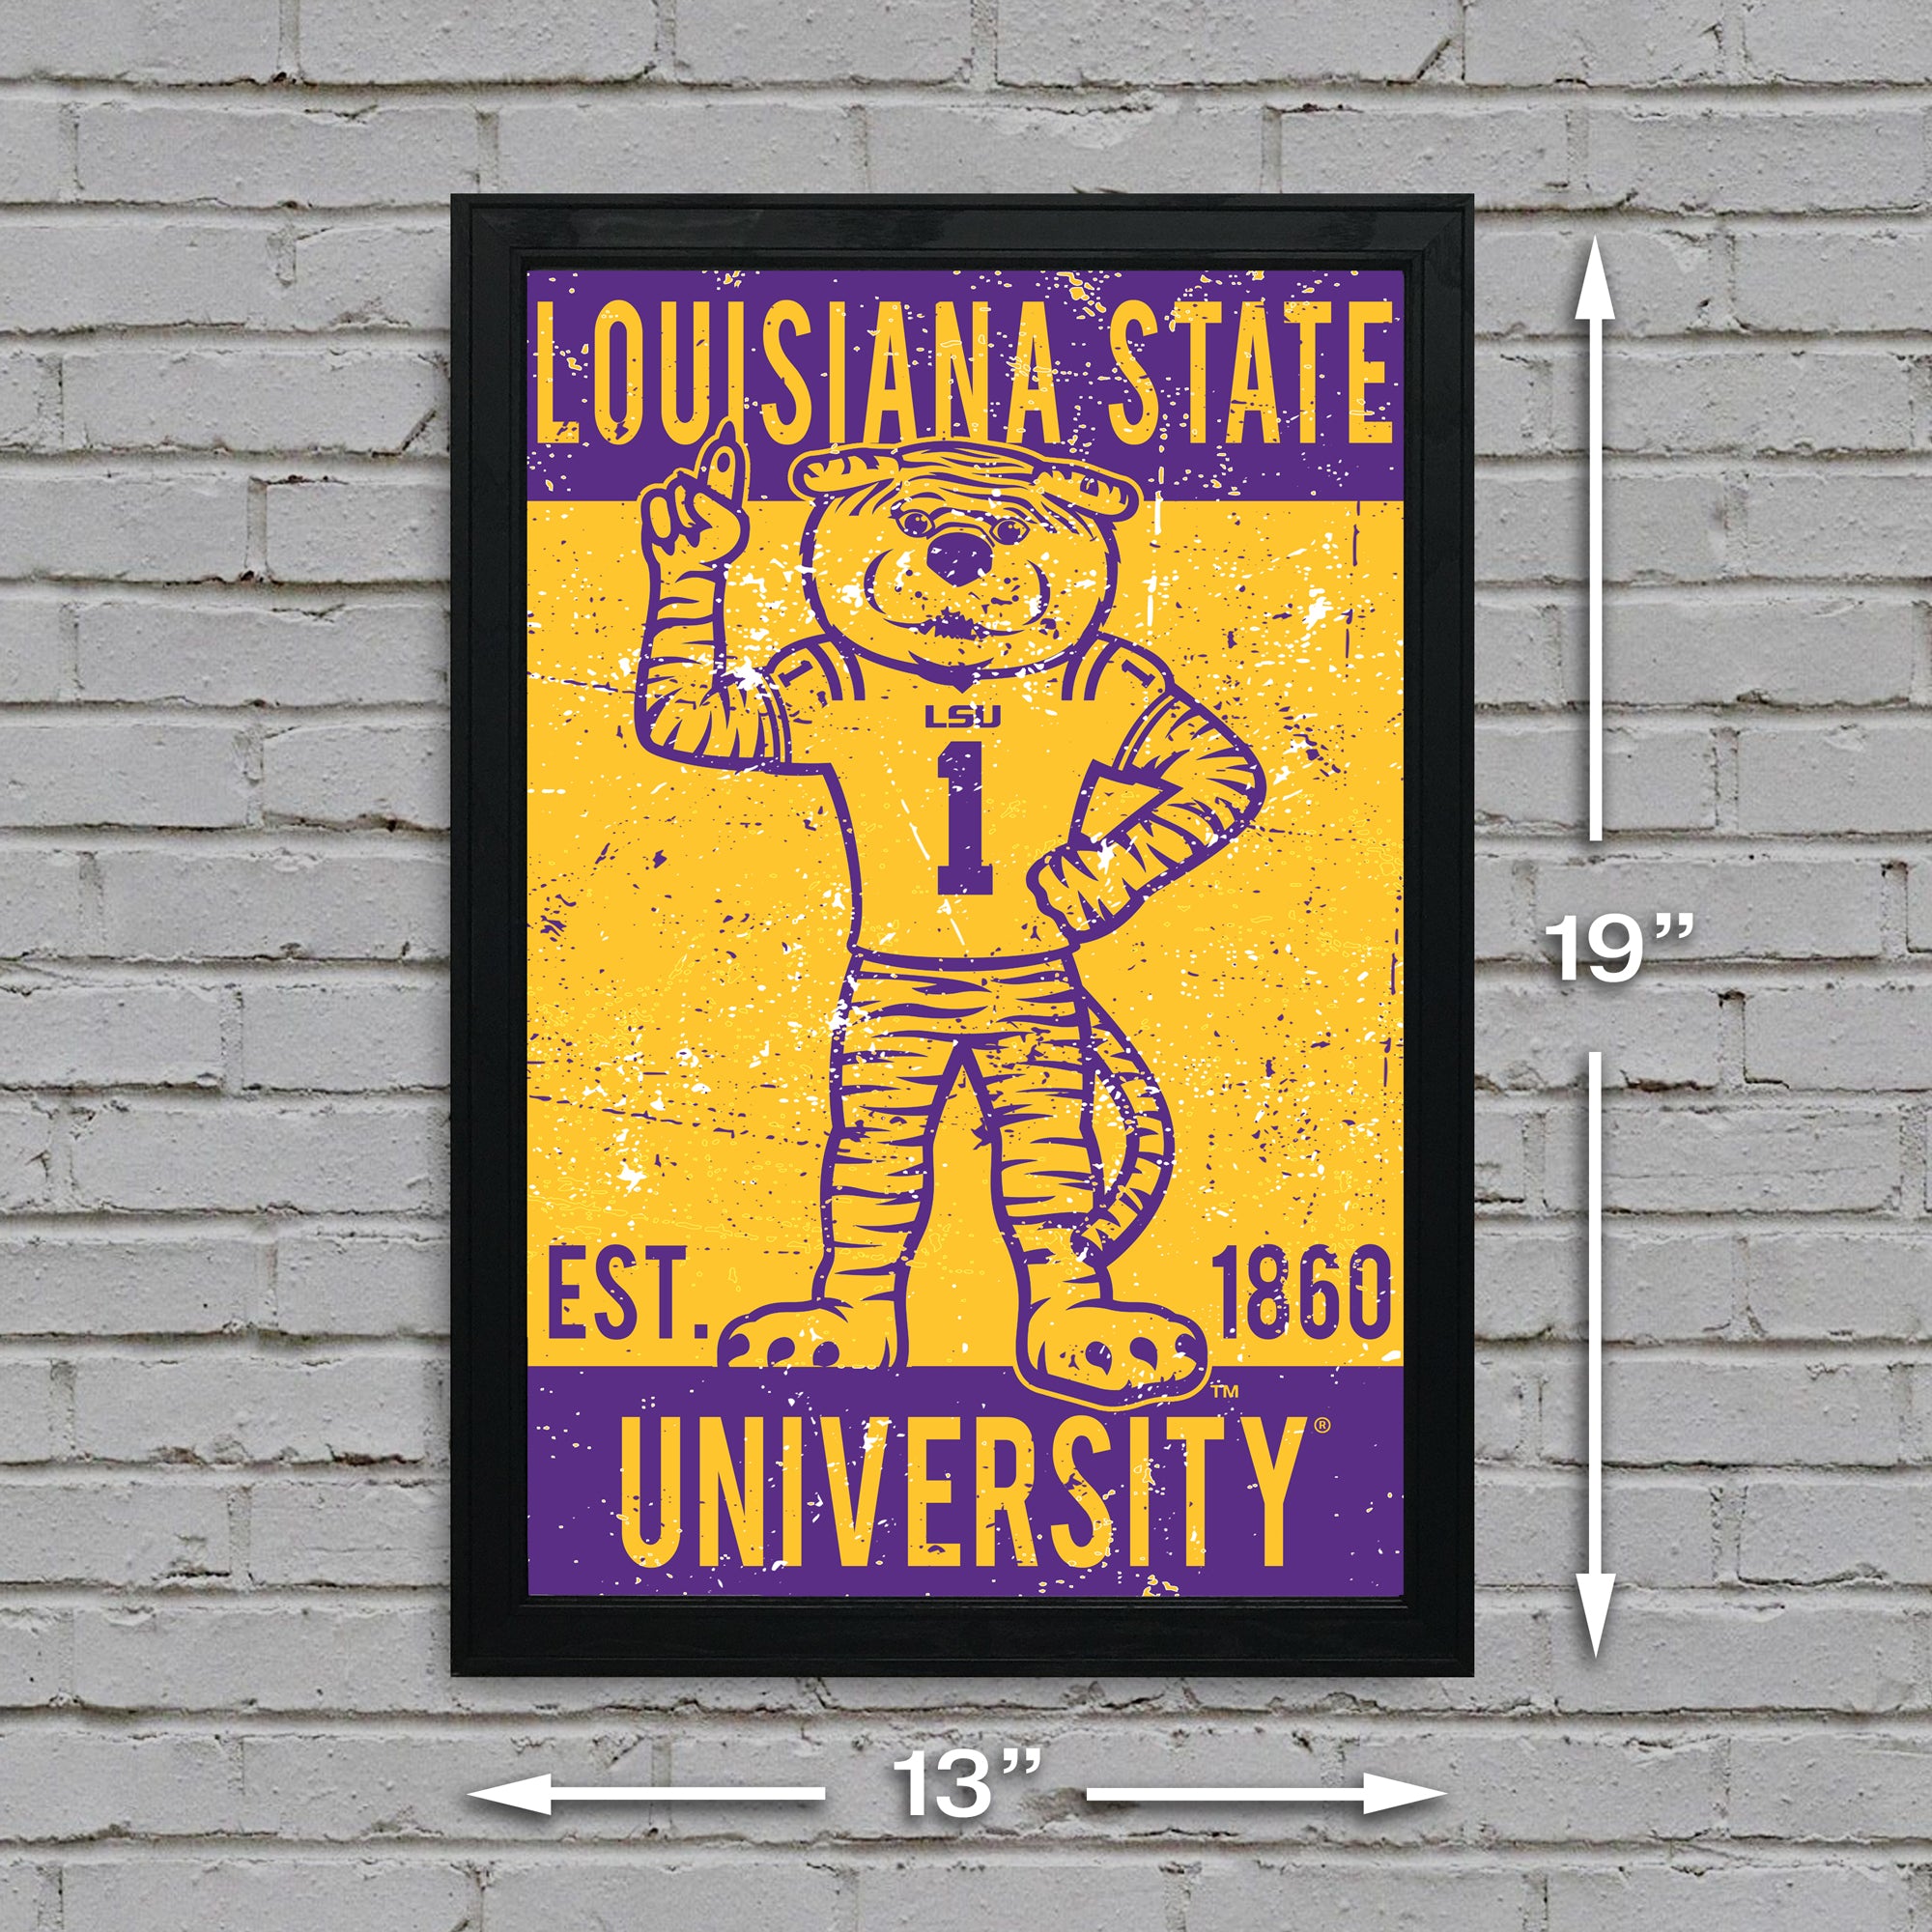 Limited Edition LSU Tigers Poster - Mike the Tiger Vintage Art Print